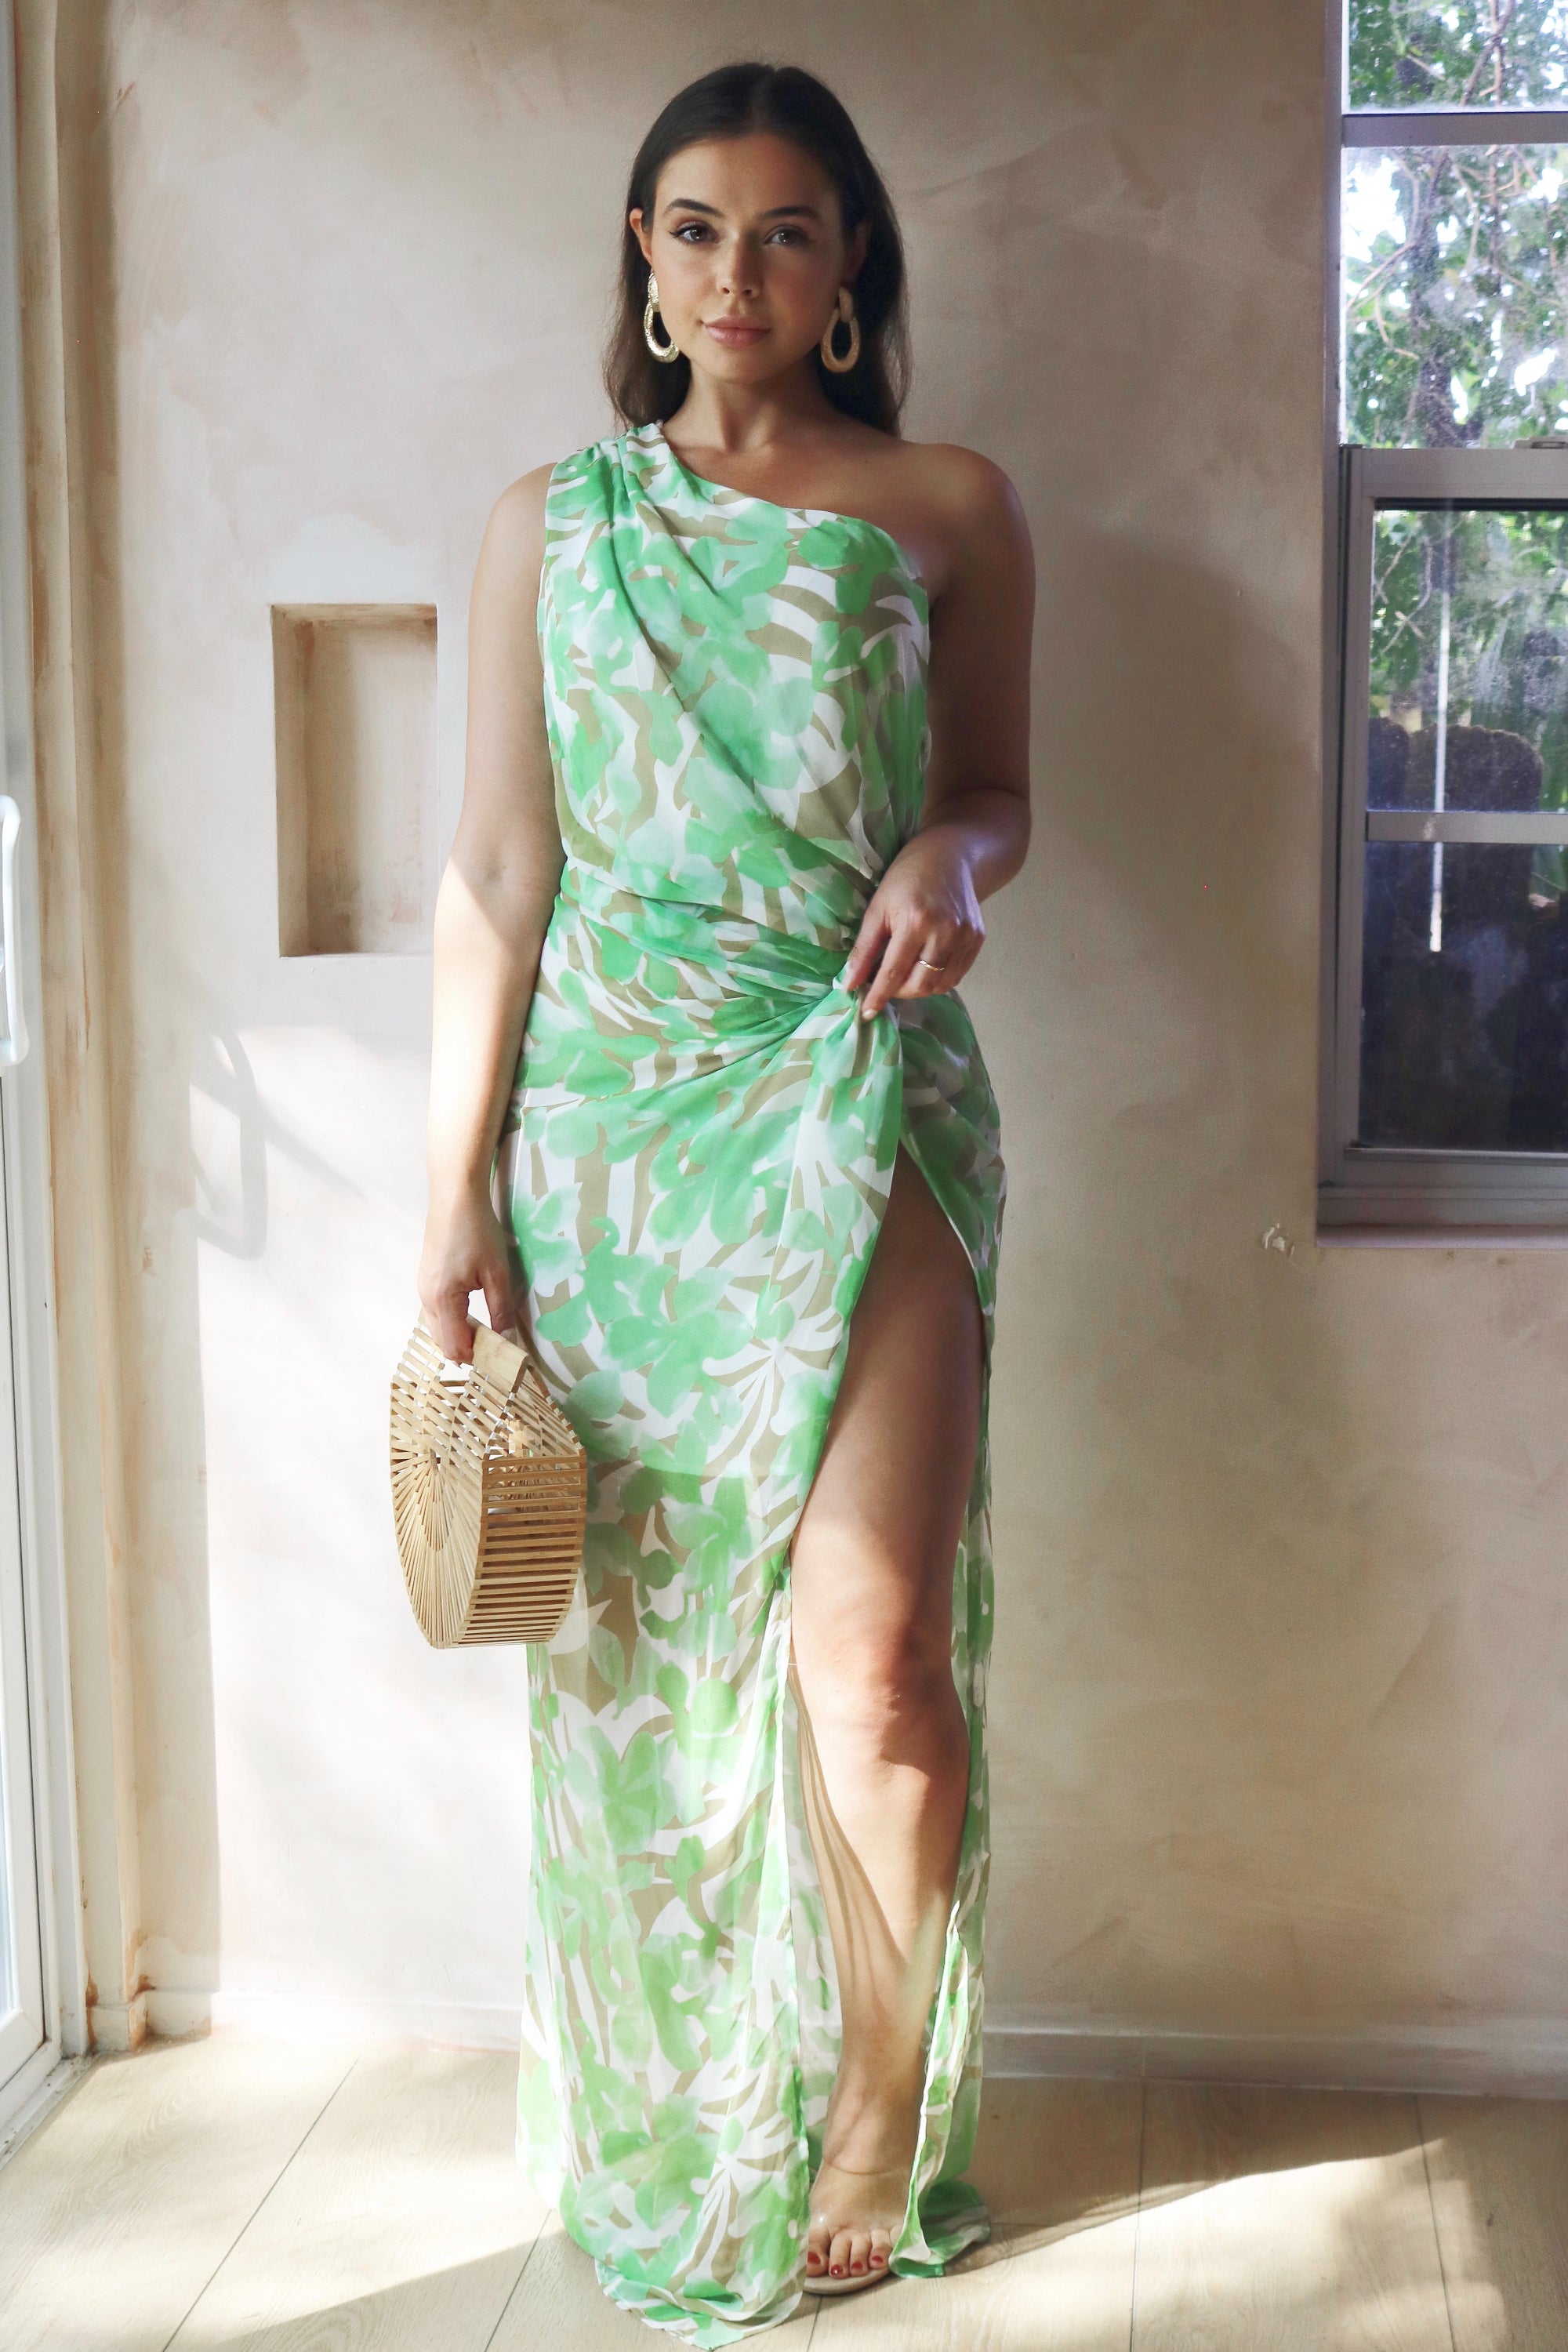 'Kalmia' Tropic One Shoulder Maxi Dress in Lime Print. Scarlette The Label, an online fashion boutique for women.